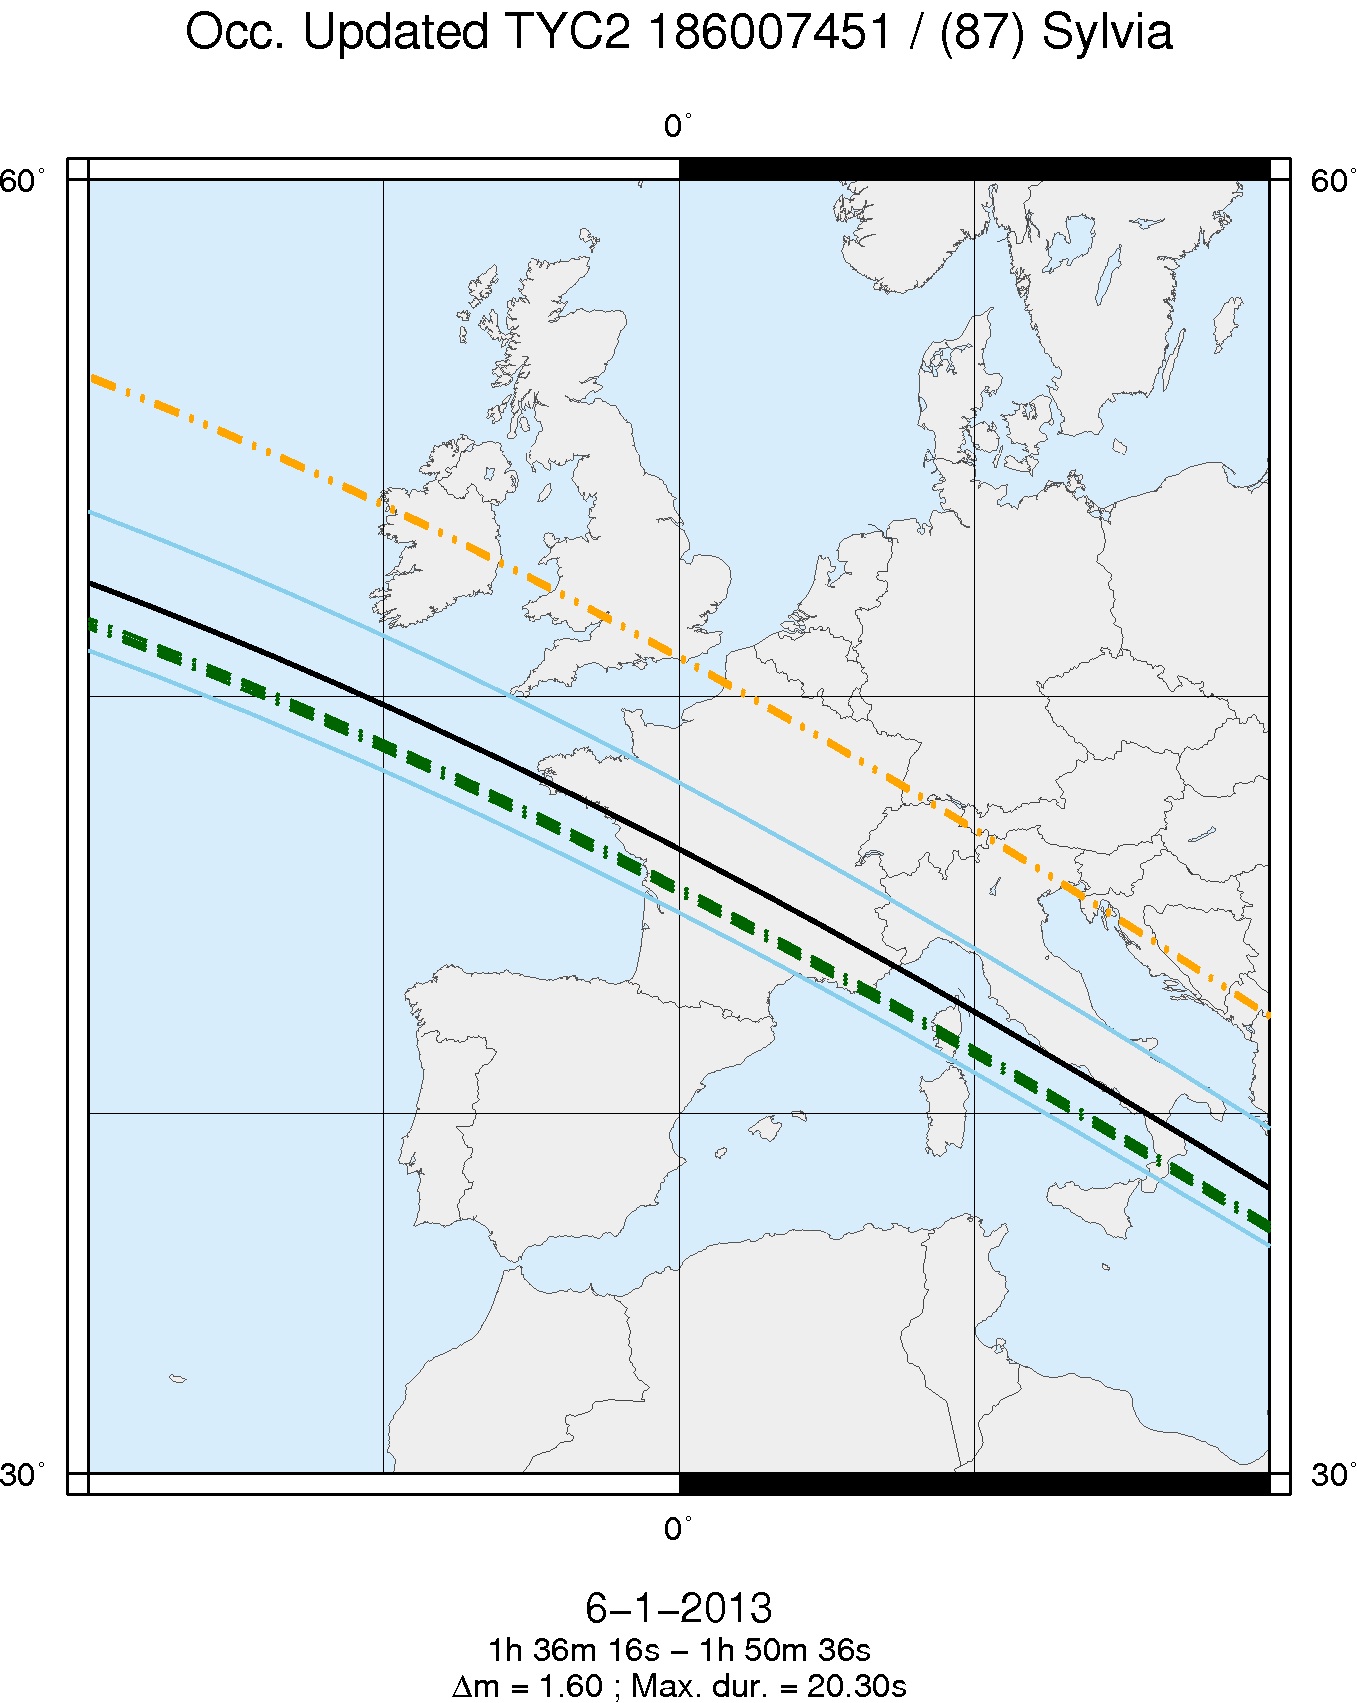 map of the path of the occultation on January 6, 2013, across Europe. The blue lines indicate the limit of the path by the primary asteroid Sylvia (centered on the black line). The green and orange lines correspond to the paths of Romulus and Remus, respectively. (credit IMCCE)